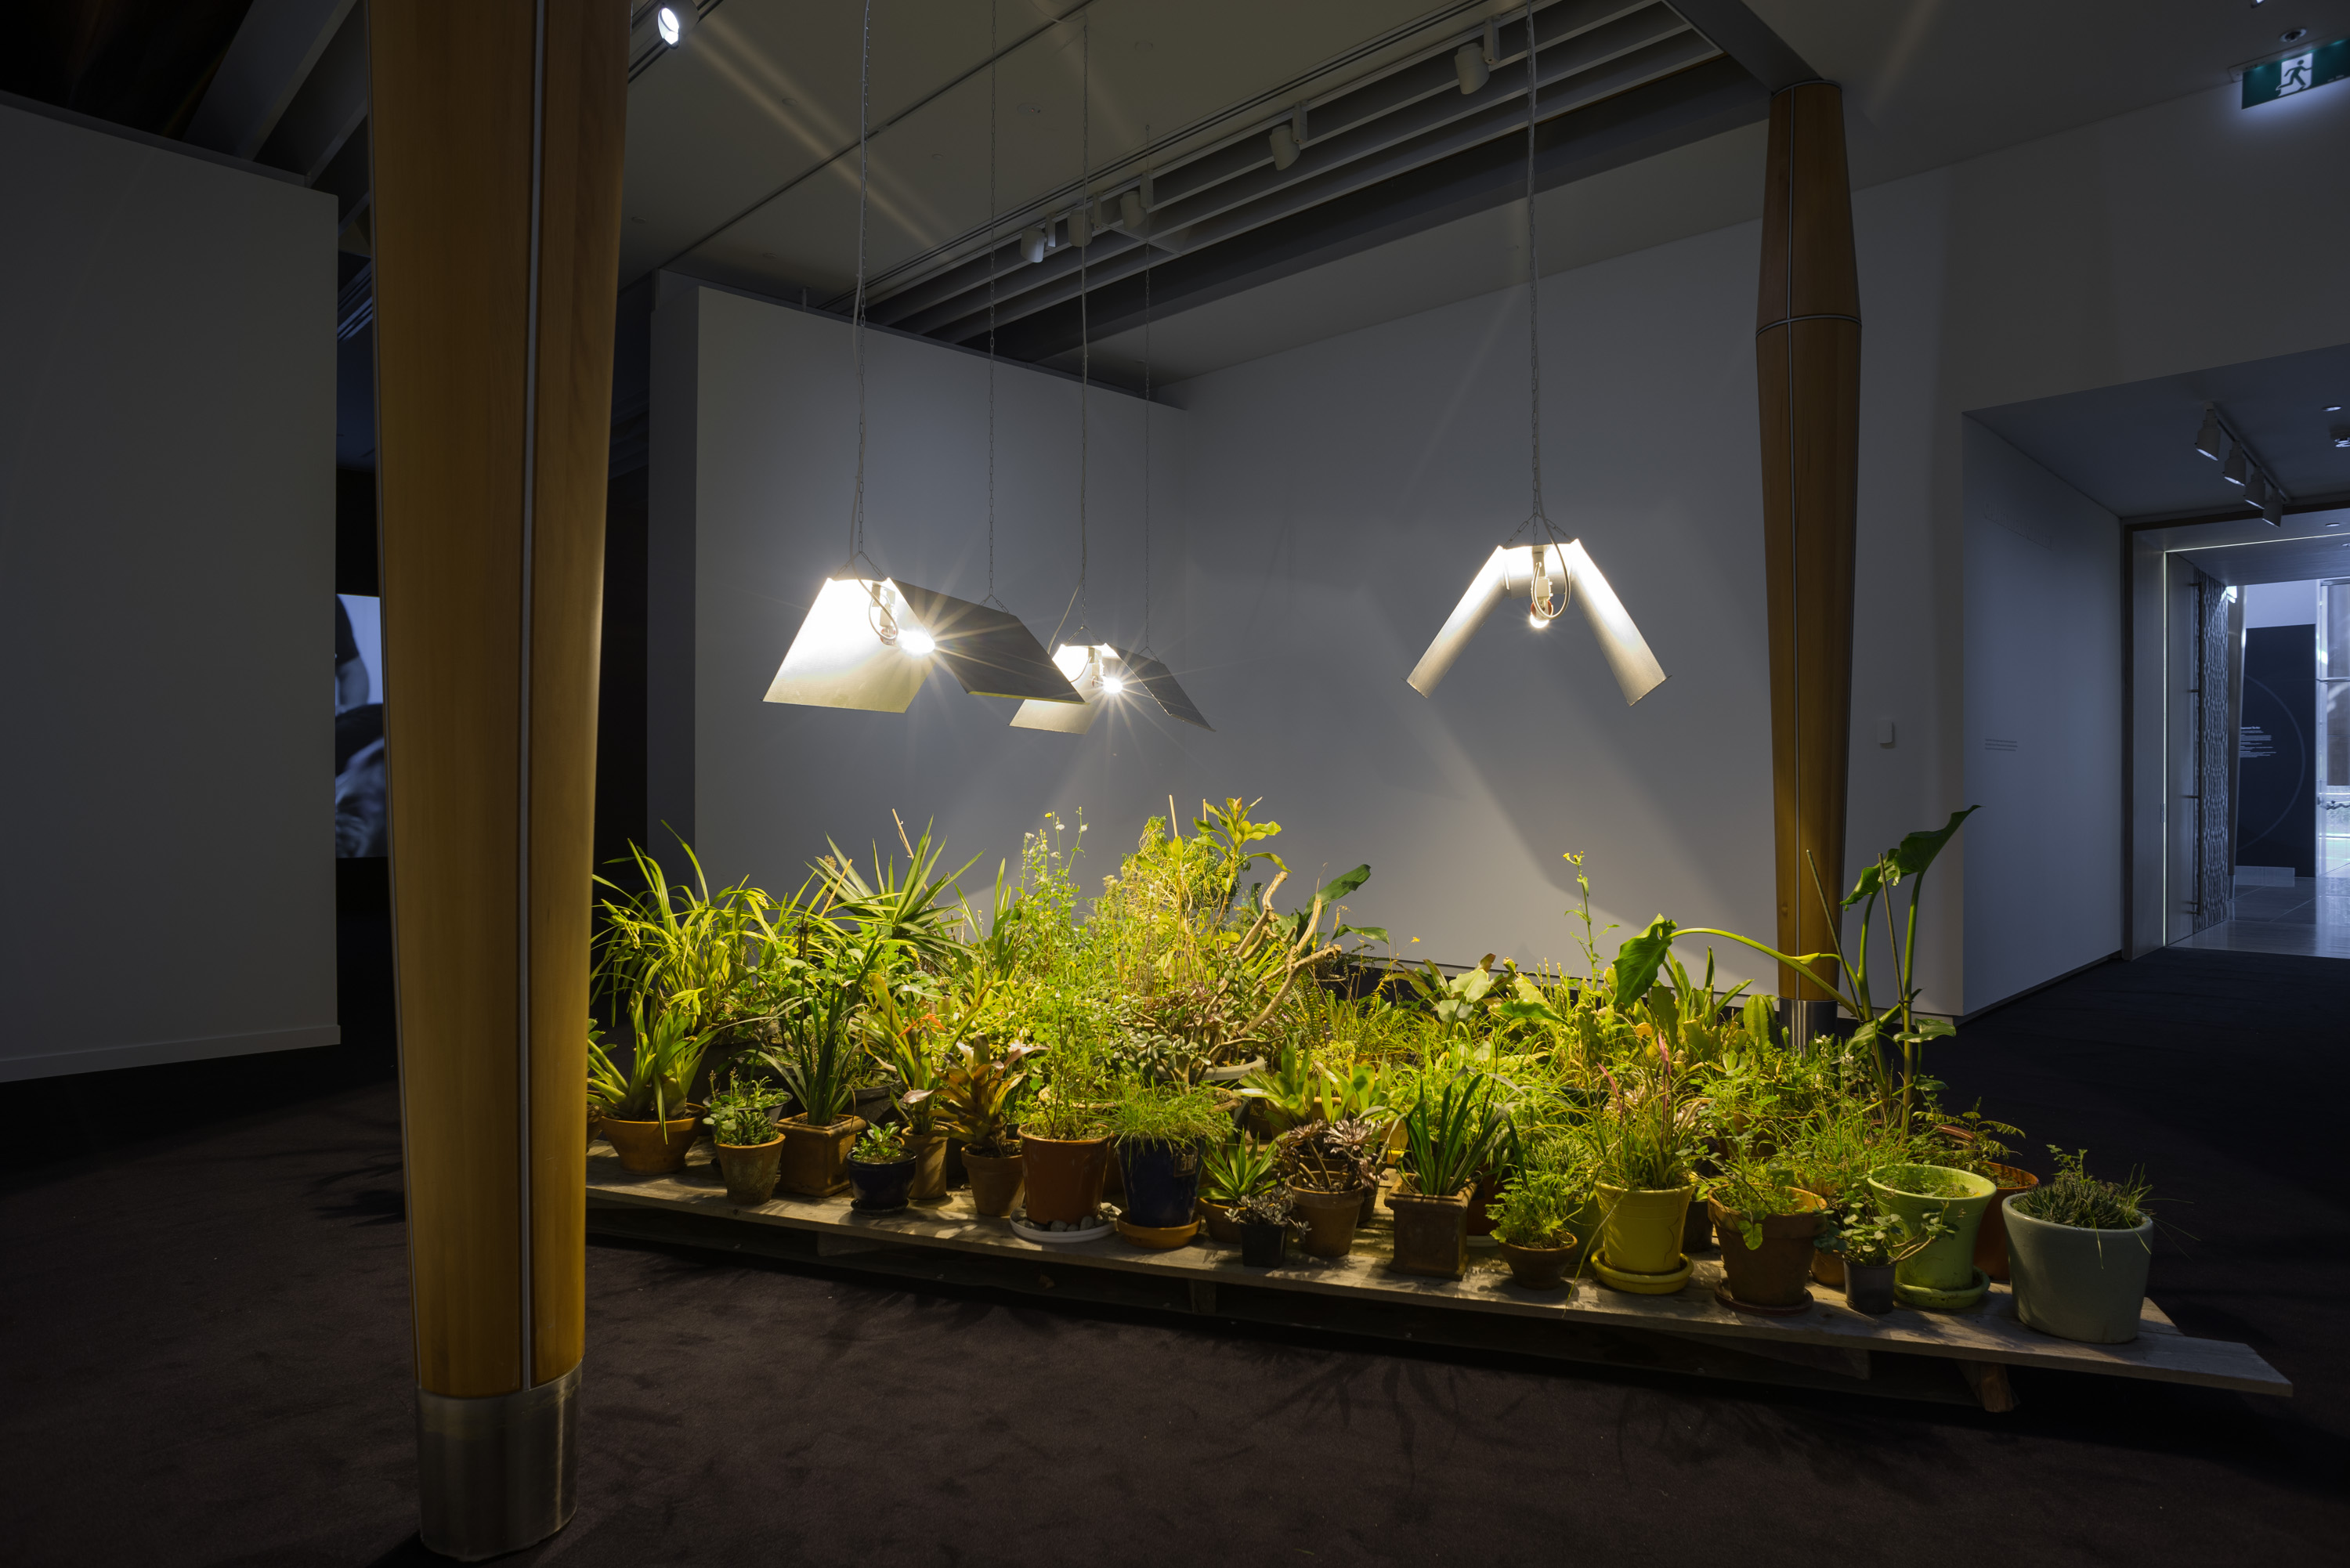 Shannon Te Ao, Okea ururoatia (never say die) (2016). Collection of plants, display furniture, ultra violet lights.